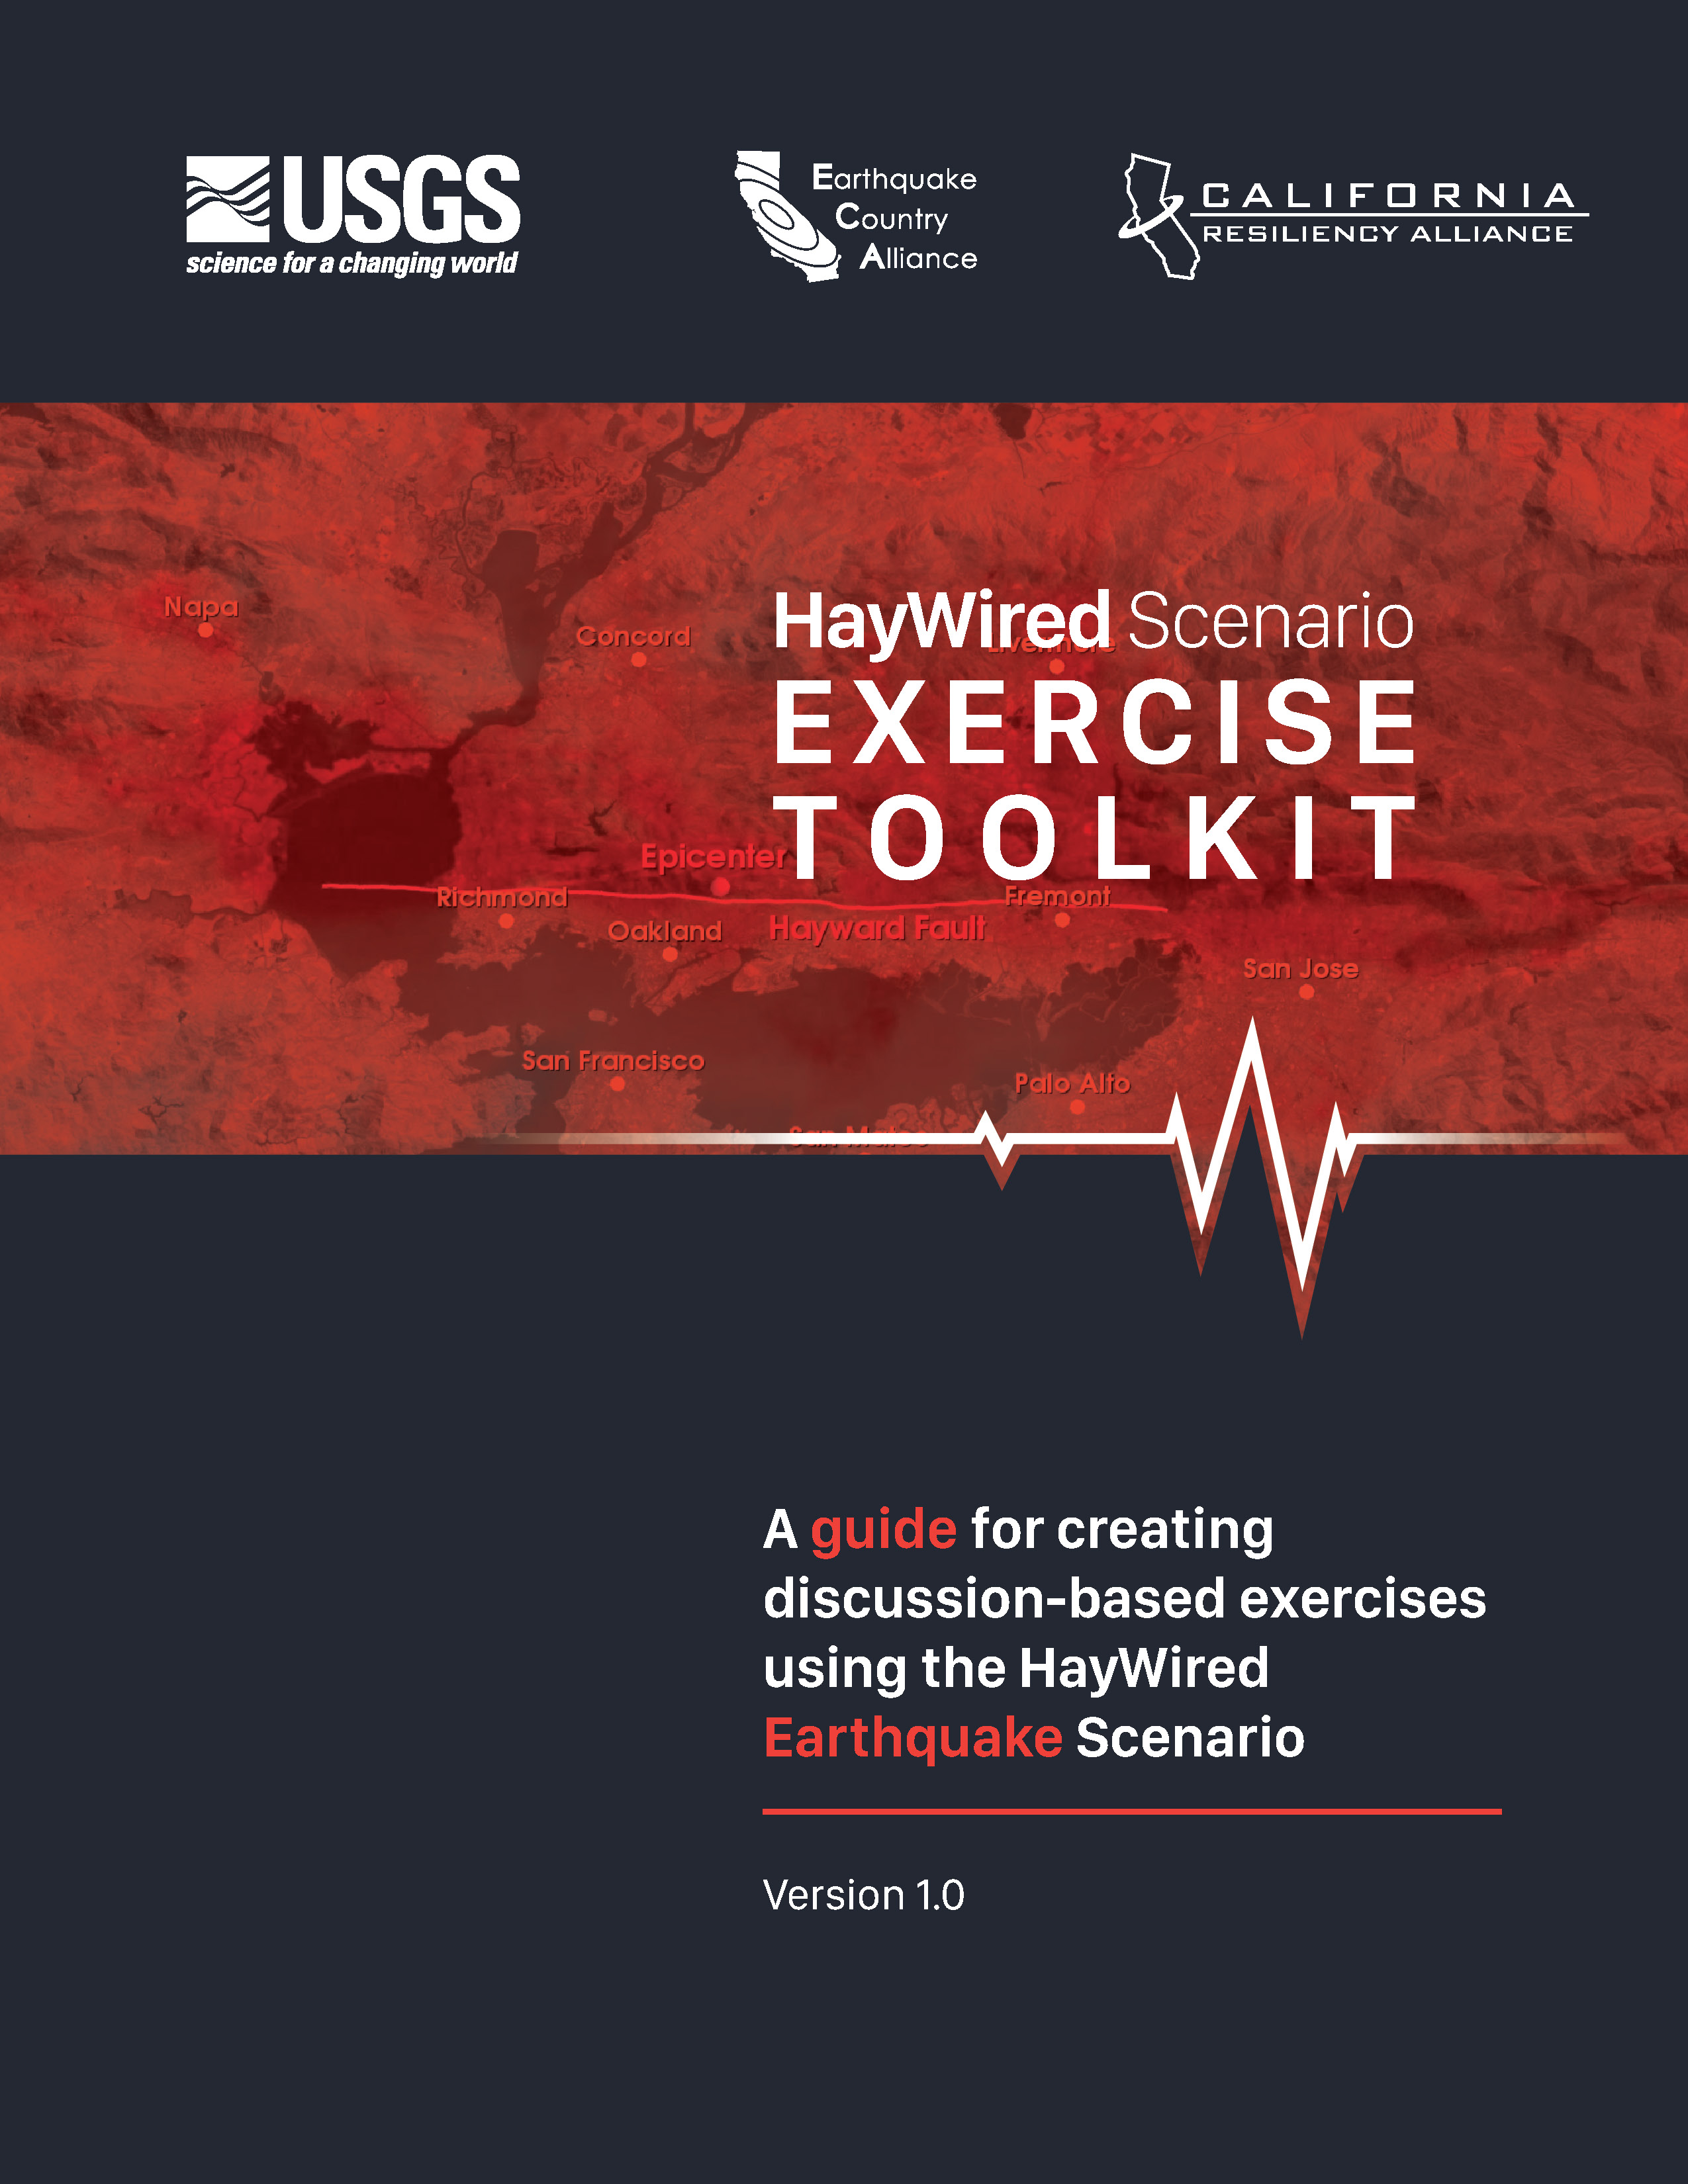 Cover for the HayWired Scenario Exercise Toolkit.